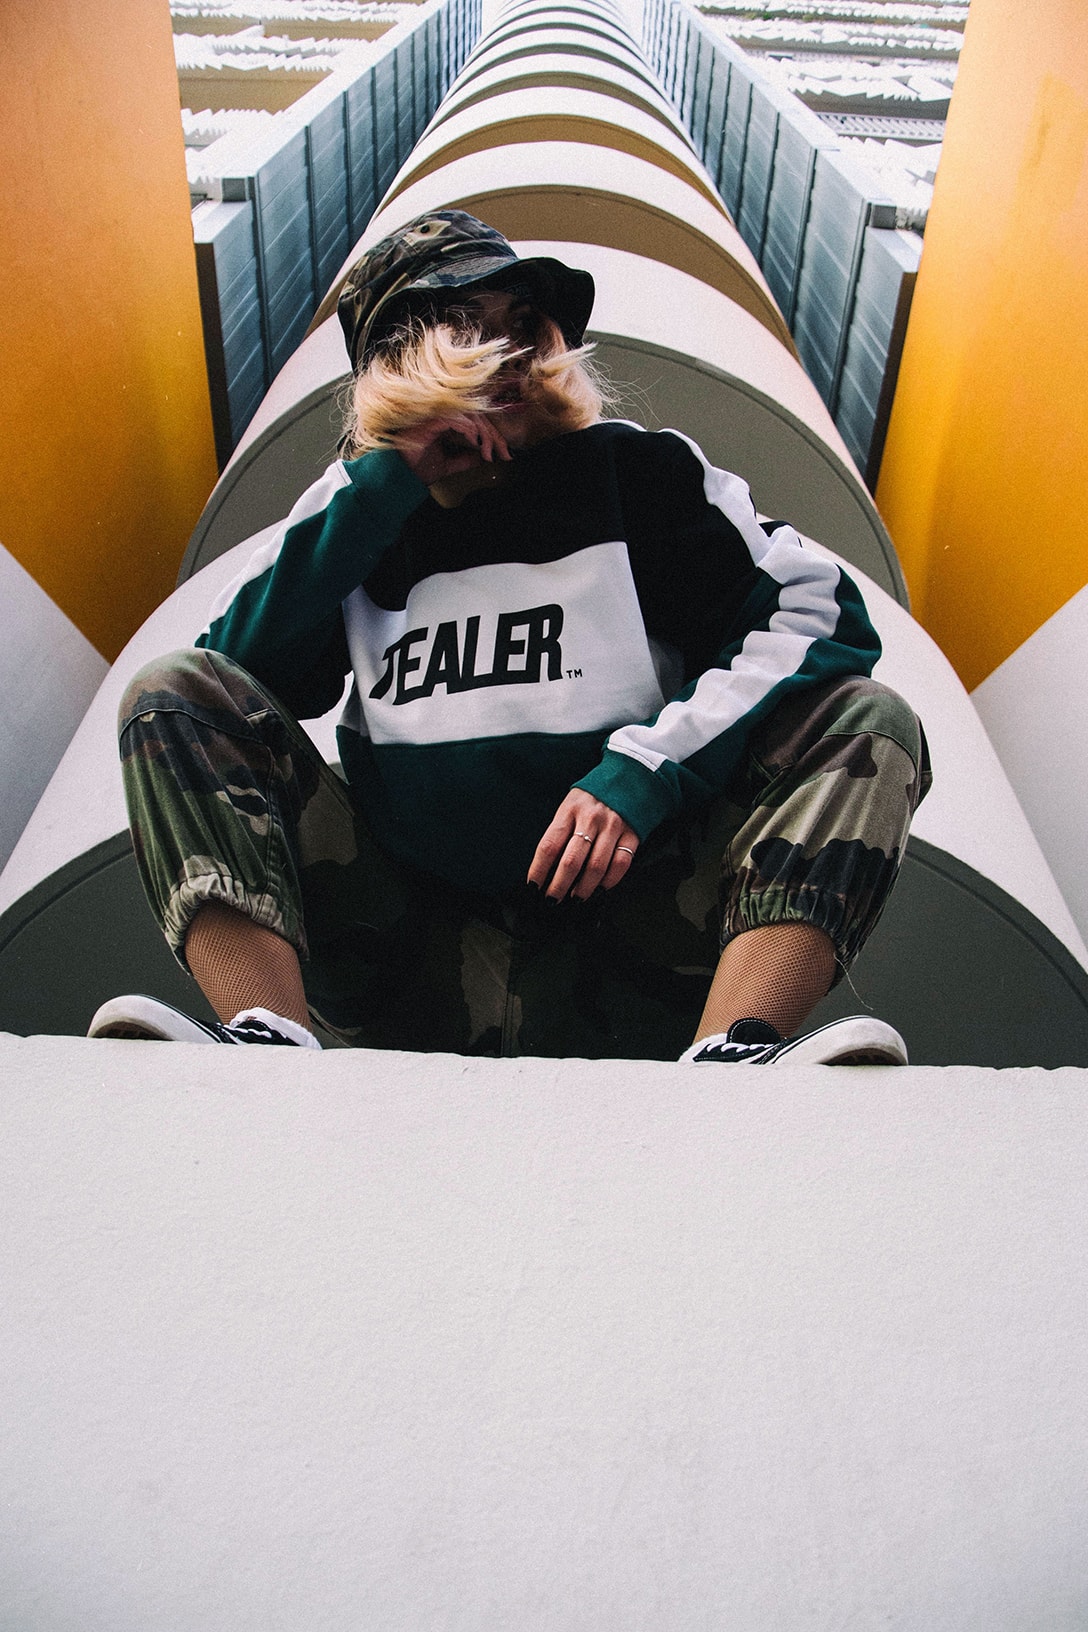 TEALER 2017 Fall Winter lookbook collection french paris tricolor branding sweaters hoodies pants